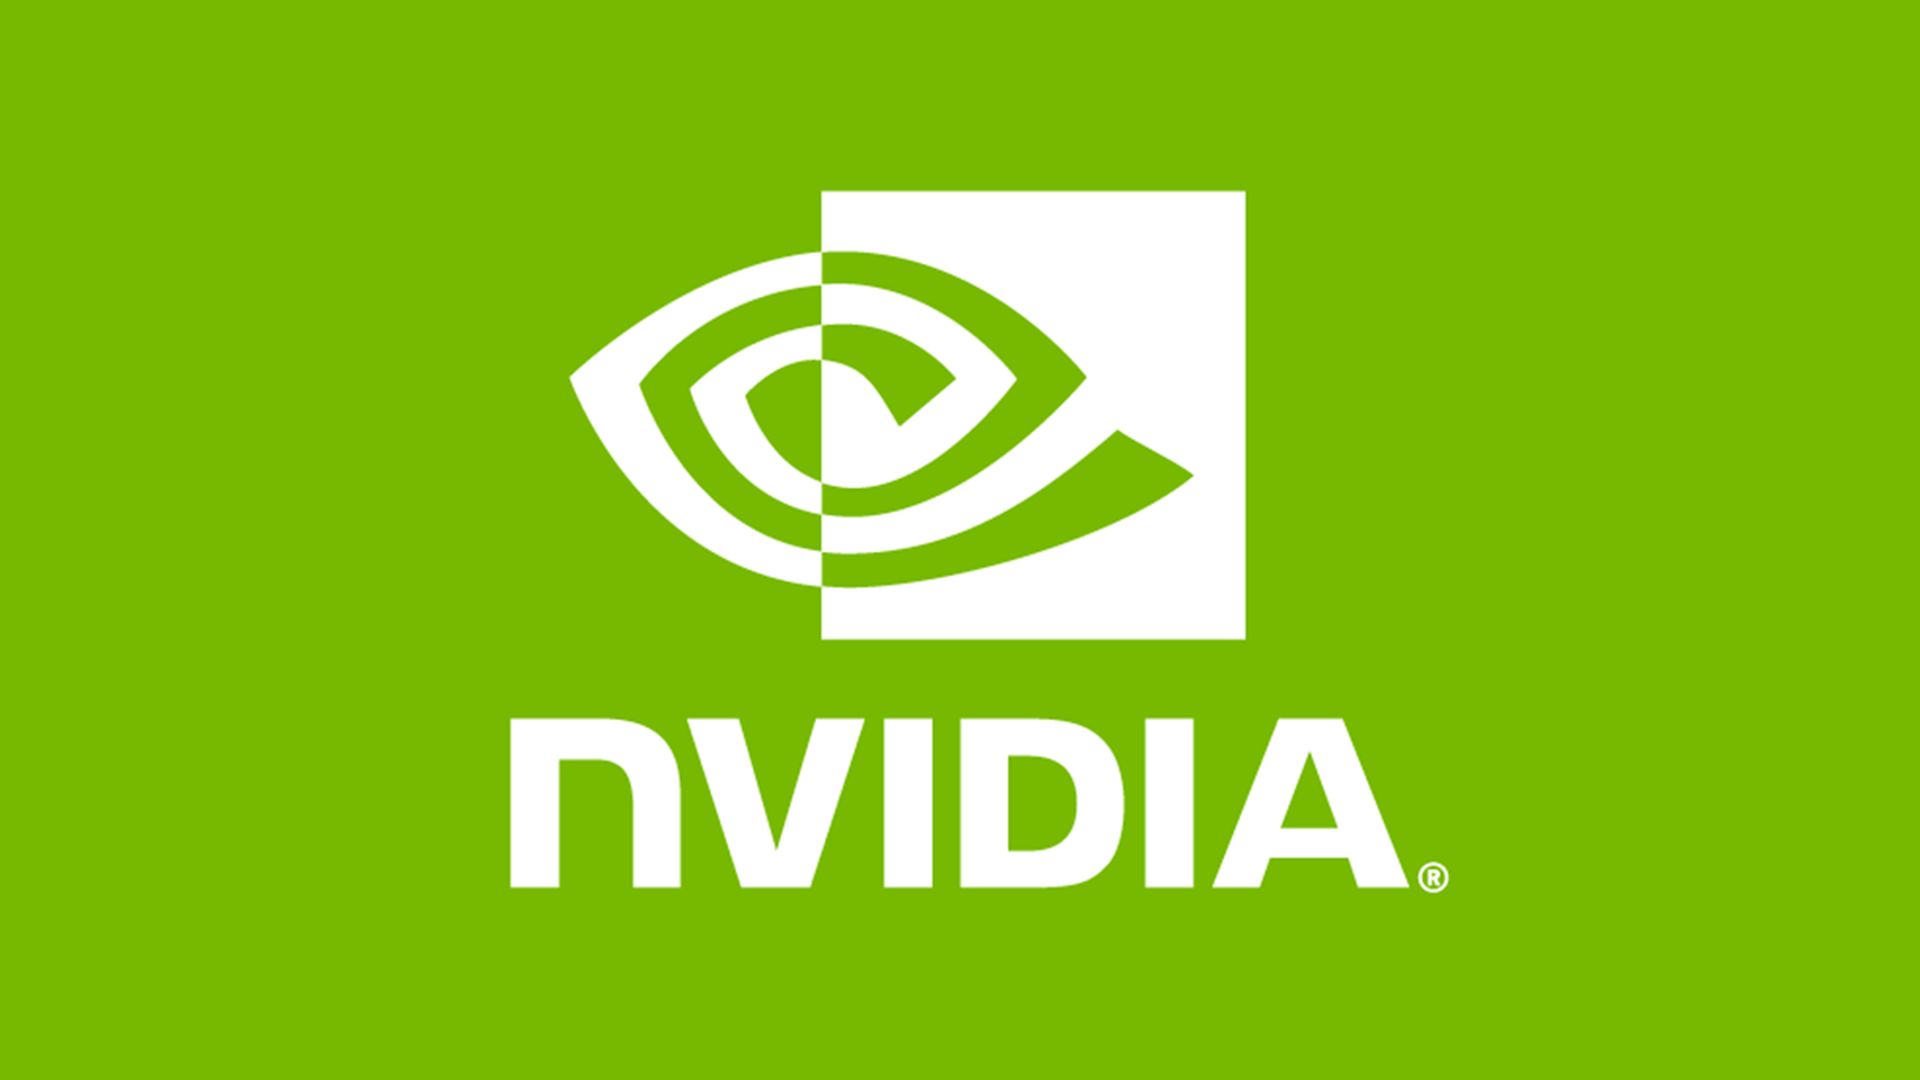 The NVIDIA control panel not opening problem might be caused by out-of-date drivers, corrupted Windows updates, or stopped processes